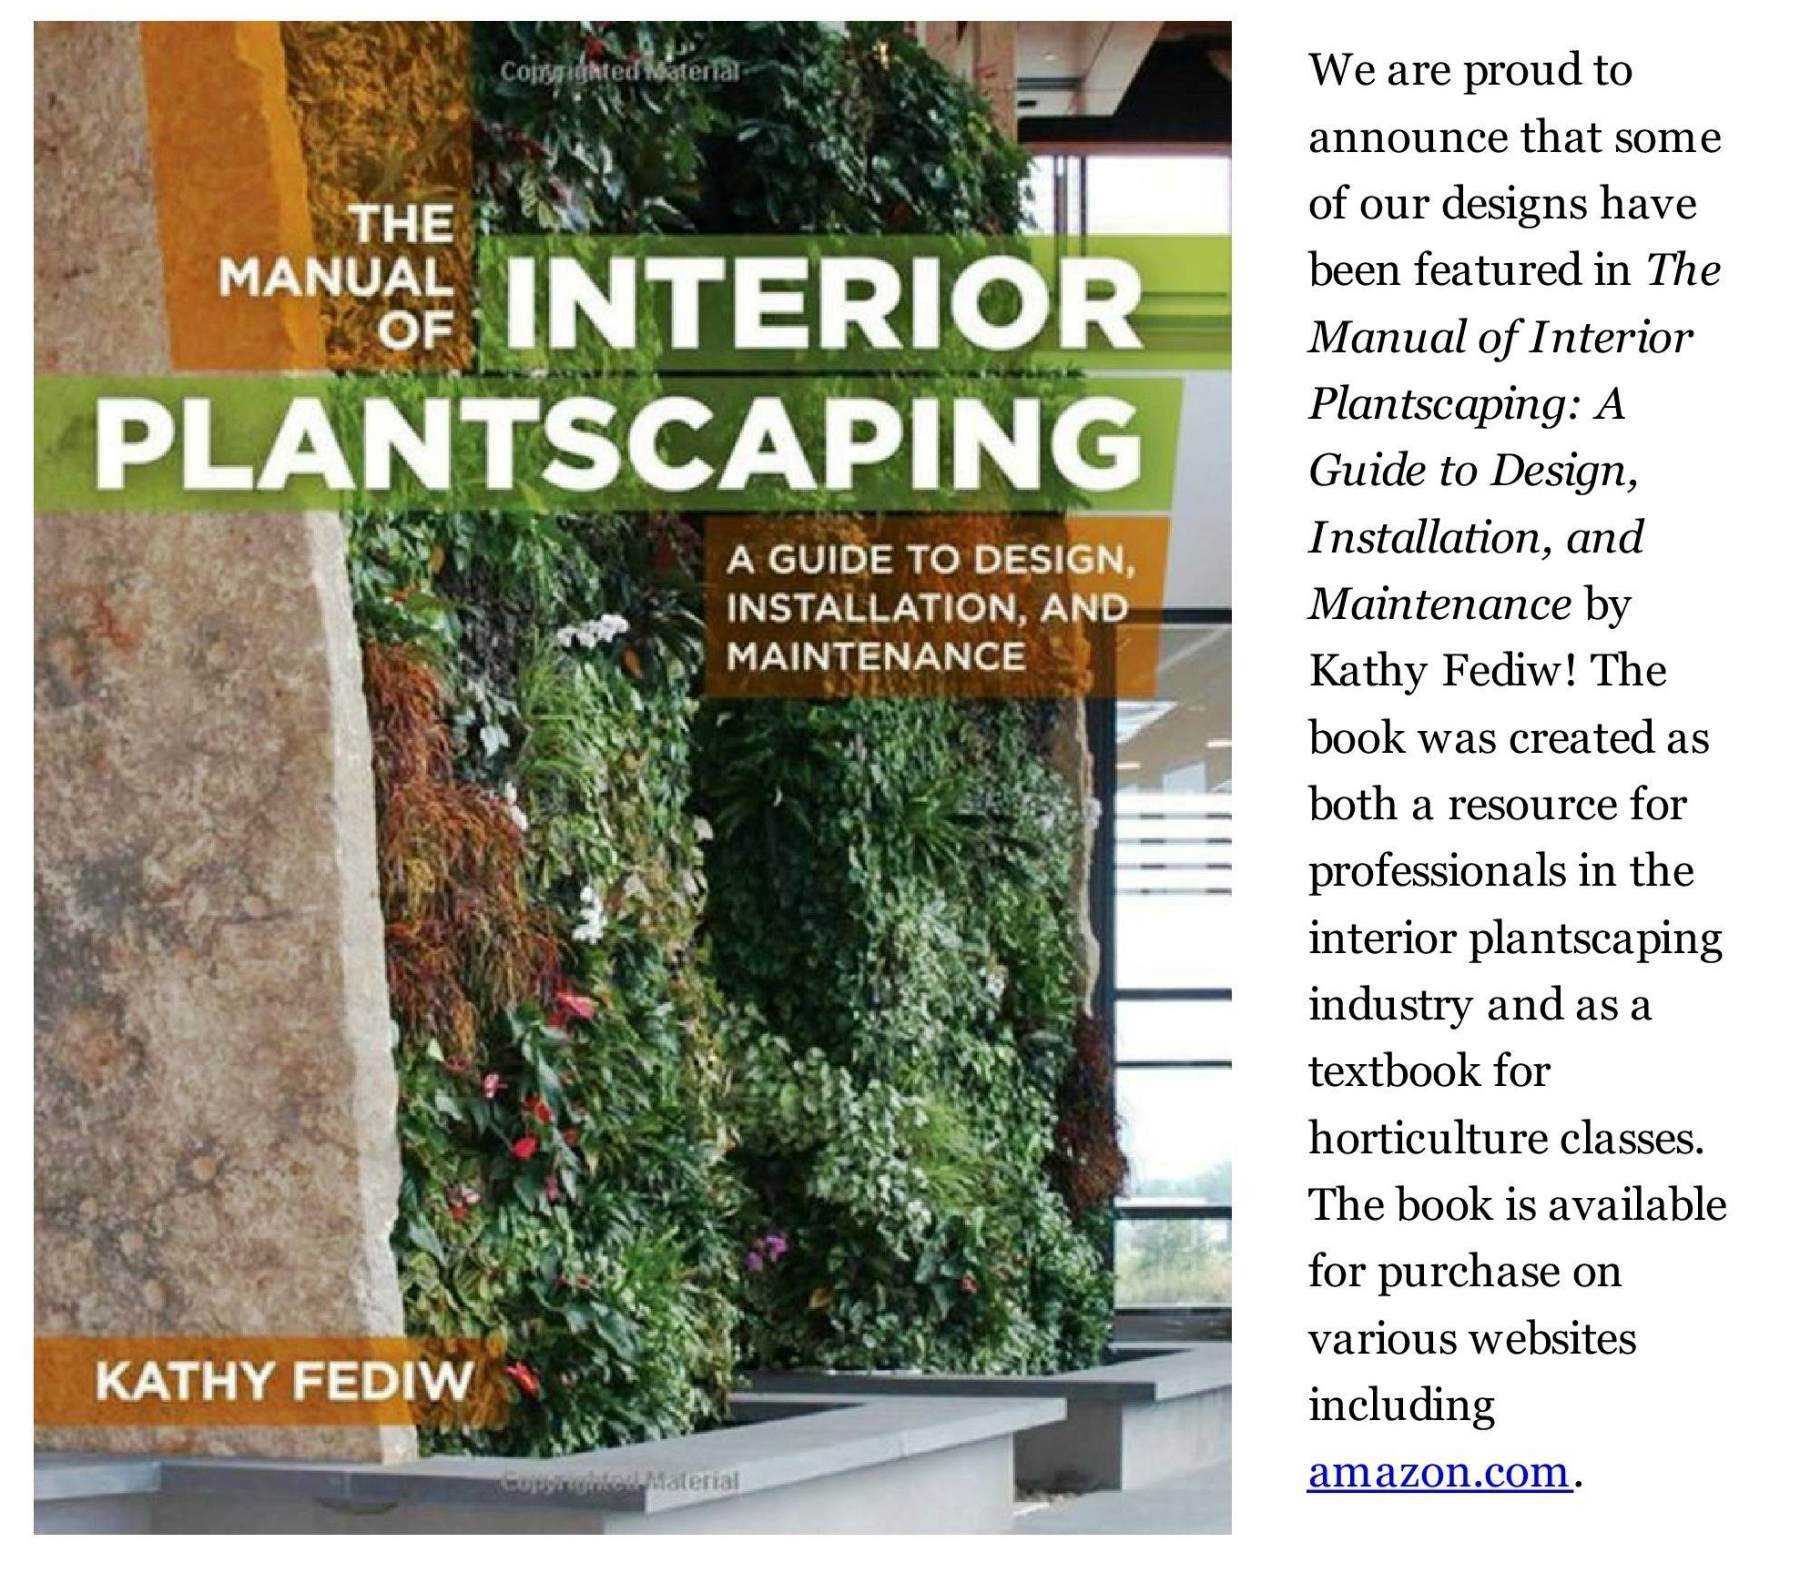 Phillip's Interior Plants Featured in Interior Plantscaping textbook!